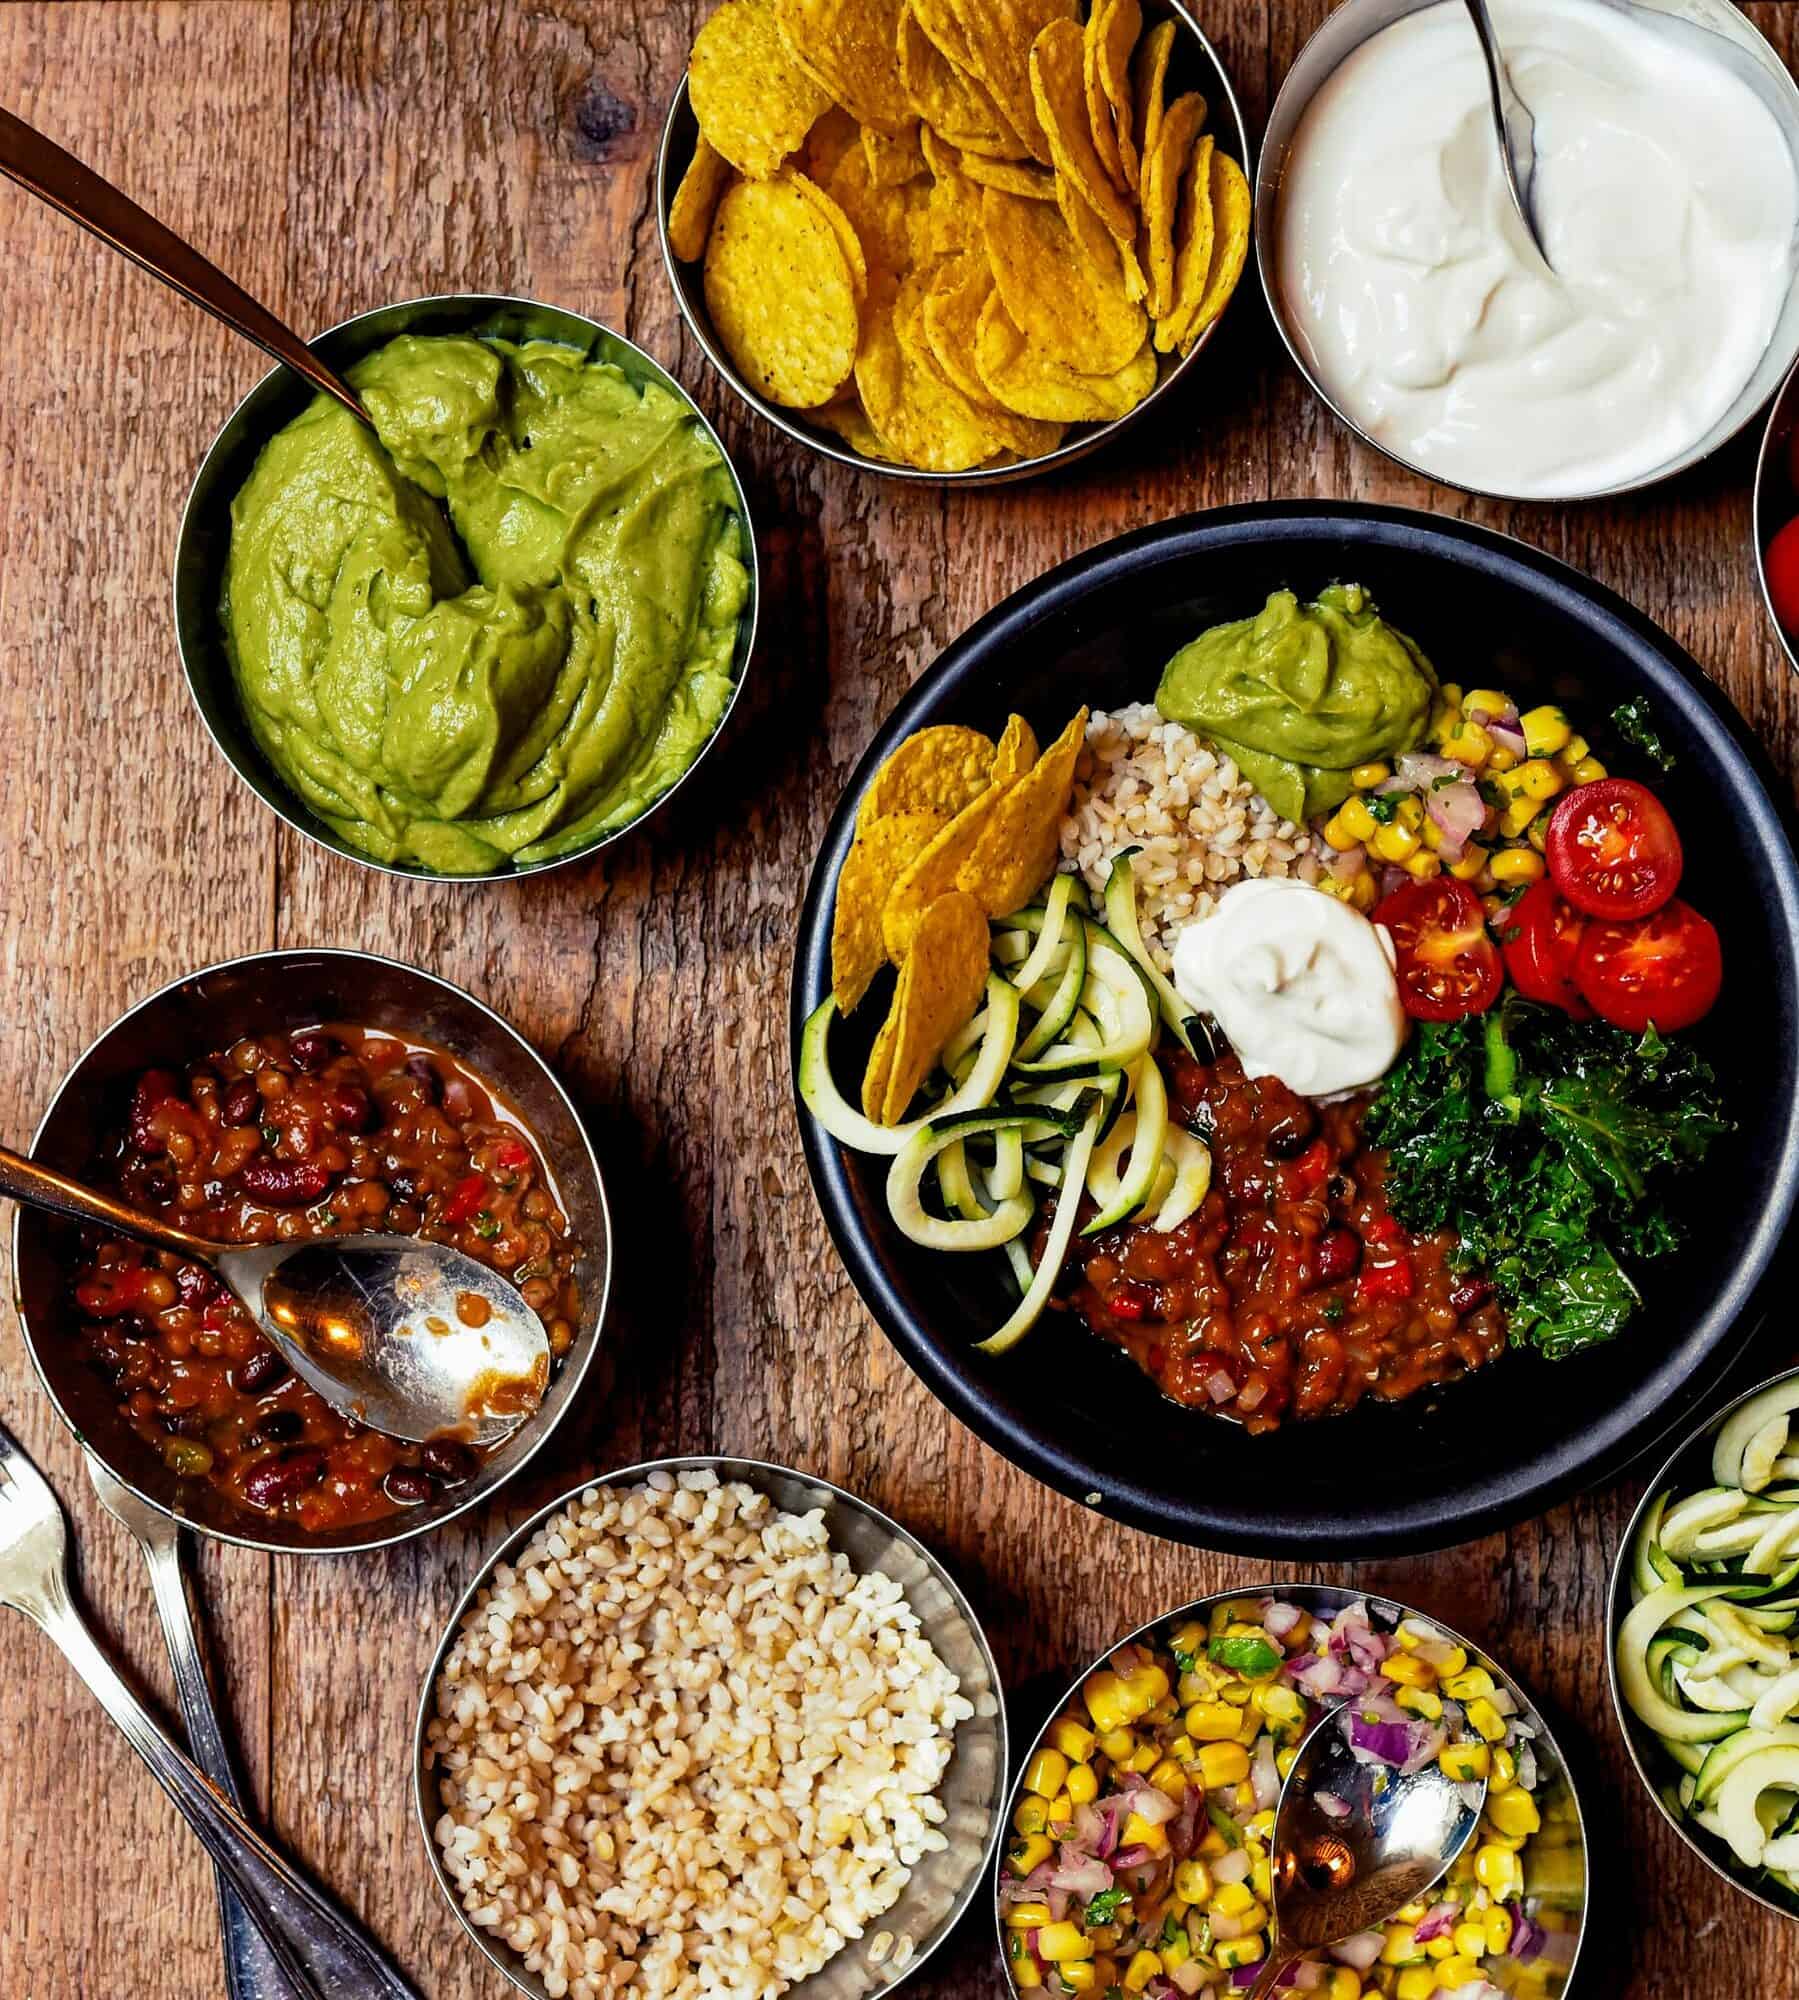 one large black bowl is in the middle of 9 smaller bowls surrounding it. each small bowl has different Mexican ingredients such as chips, guac, tomatoes, salsa, greens, sour cream and peppers. the background is a brown table. the foreground is the bowls of food. the angle of the shot is looking down from an aerial view.